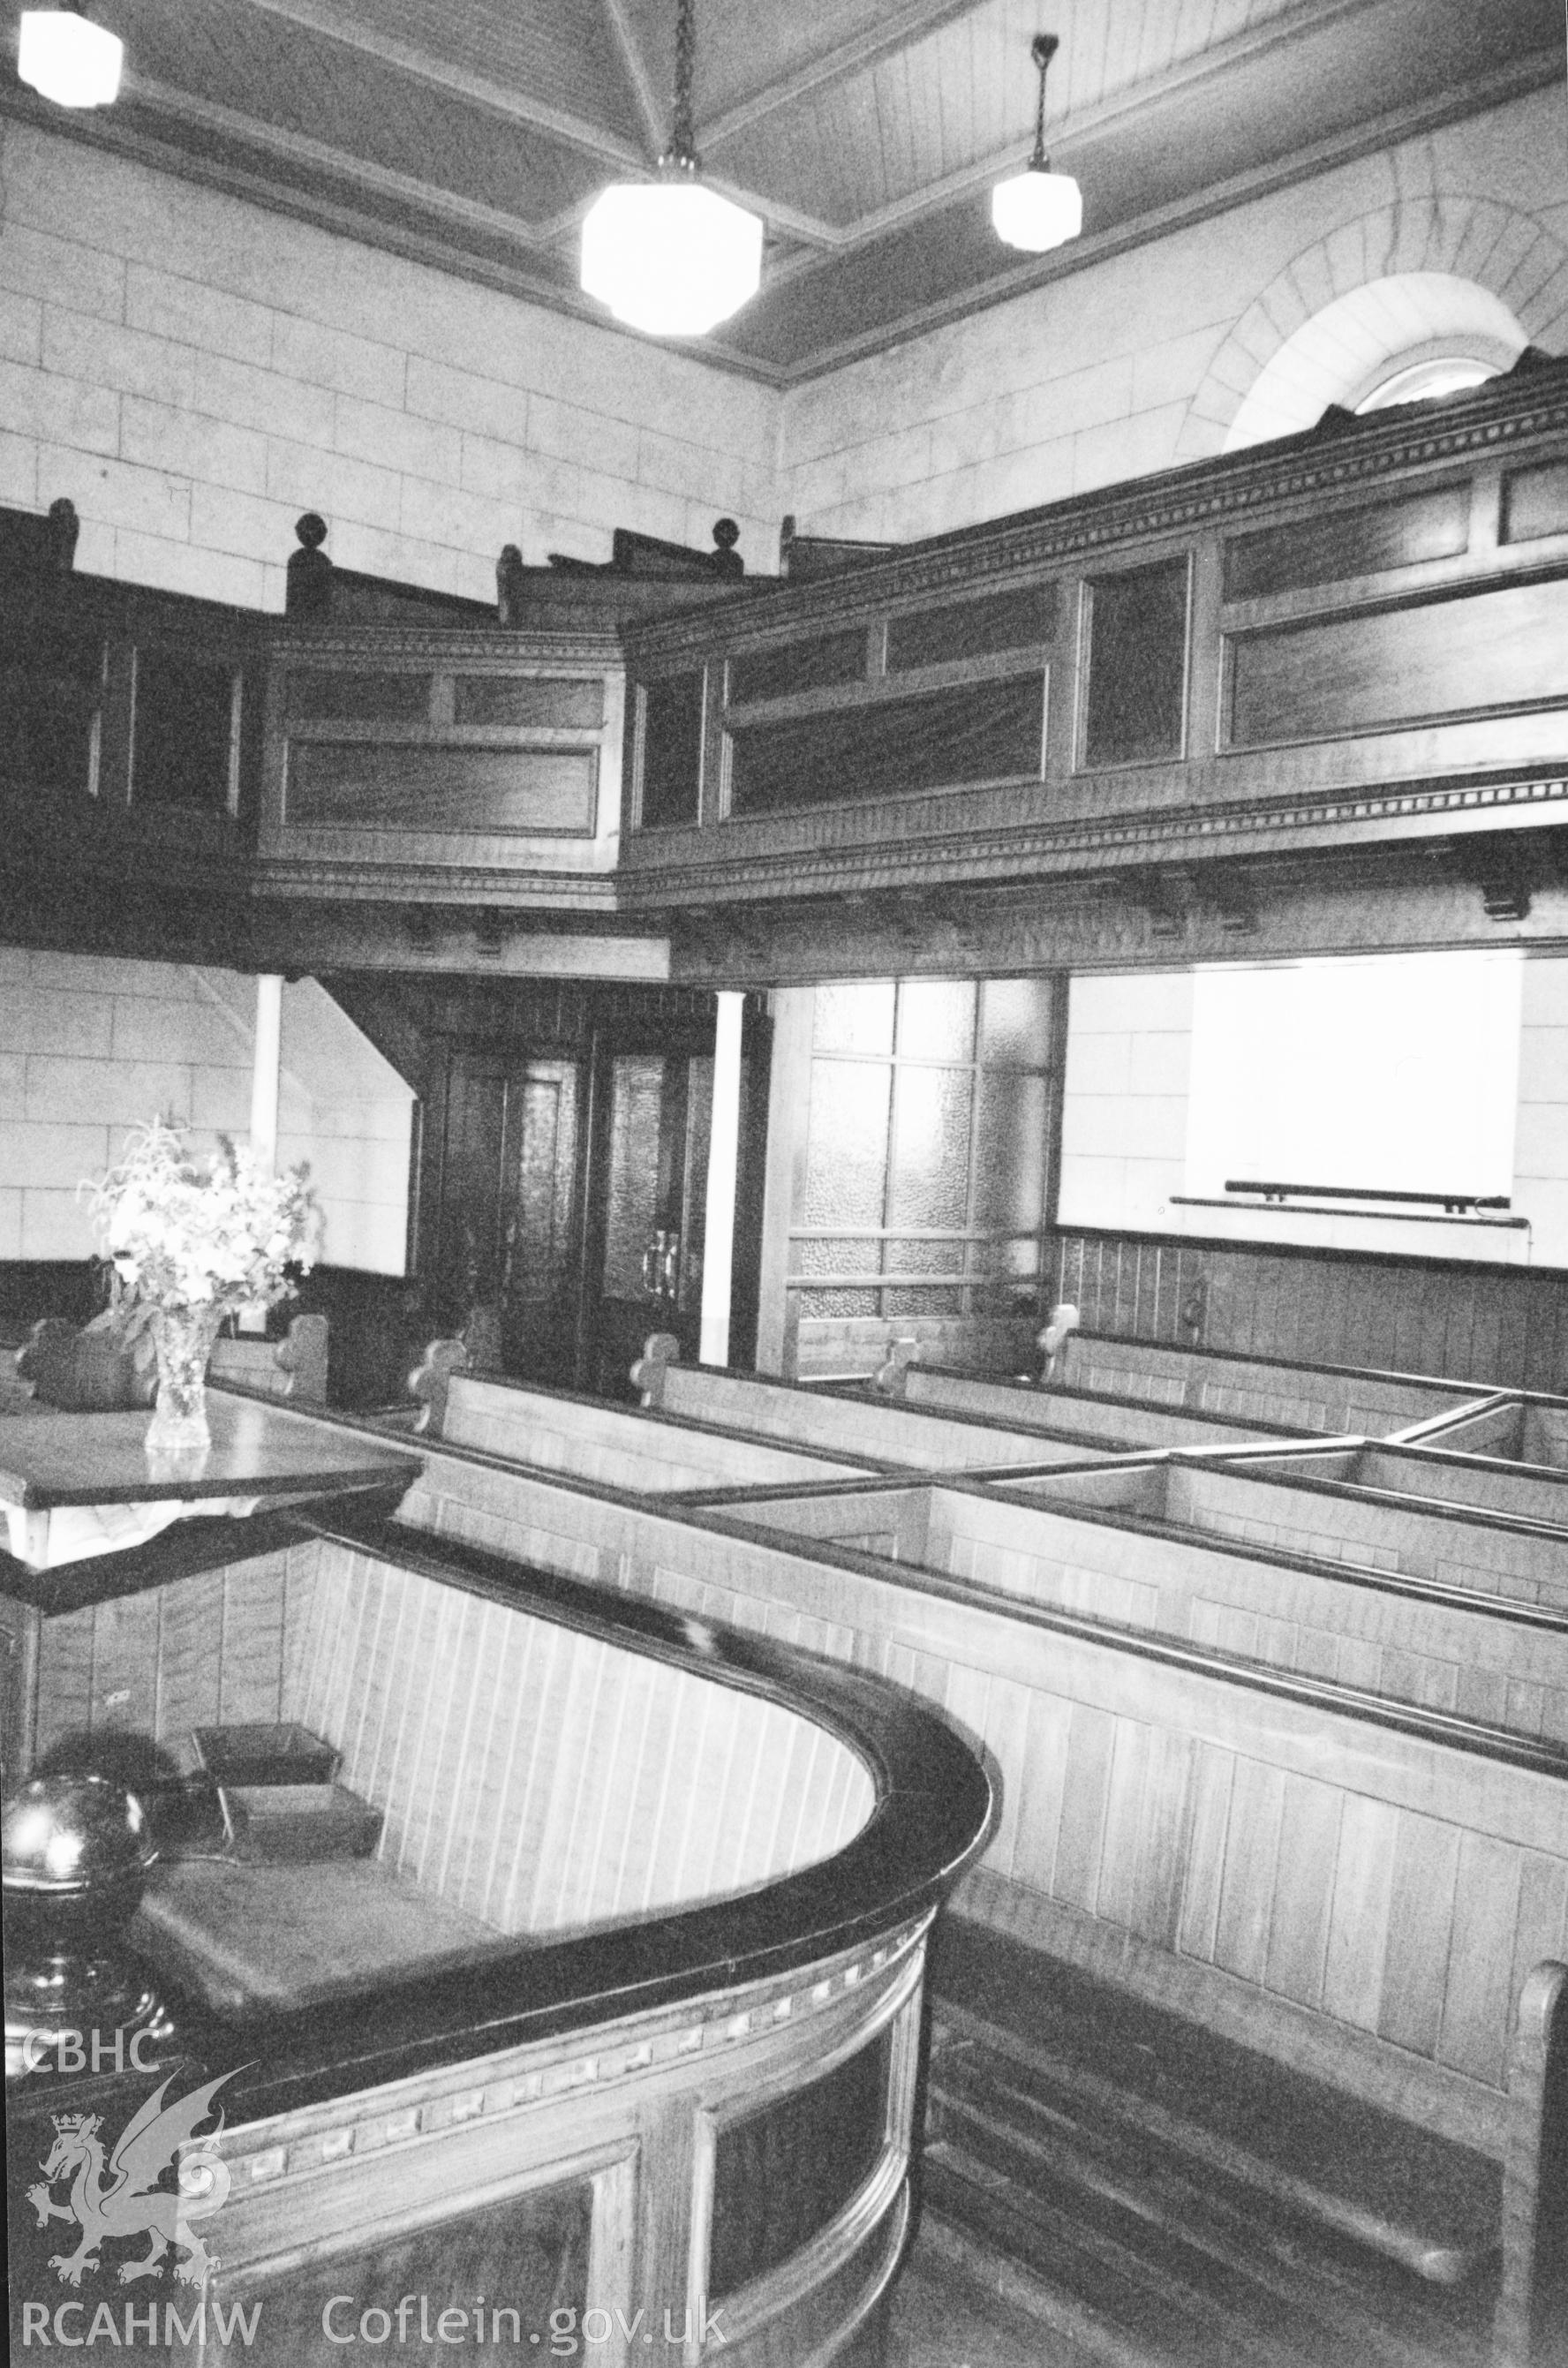 Digital copy of a black and white photograph showing an interior view of Tabernacl Welsh Calvinistic Methodist Chapel, Llanddowror, taken by Robert Scourfield, 1996.